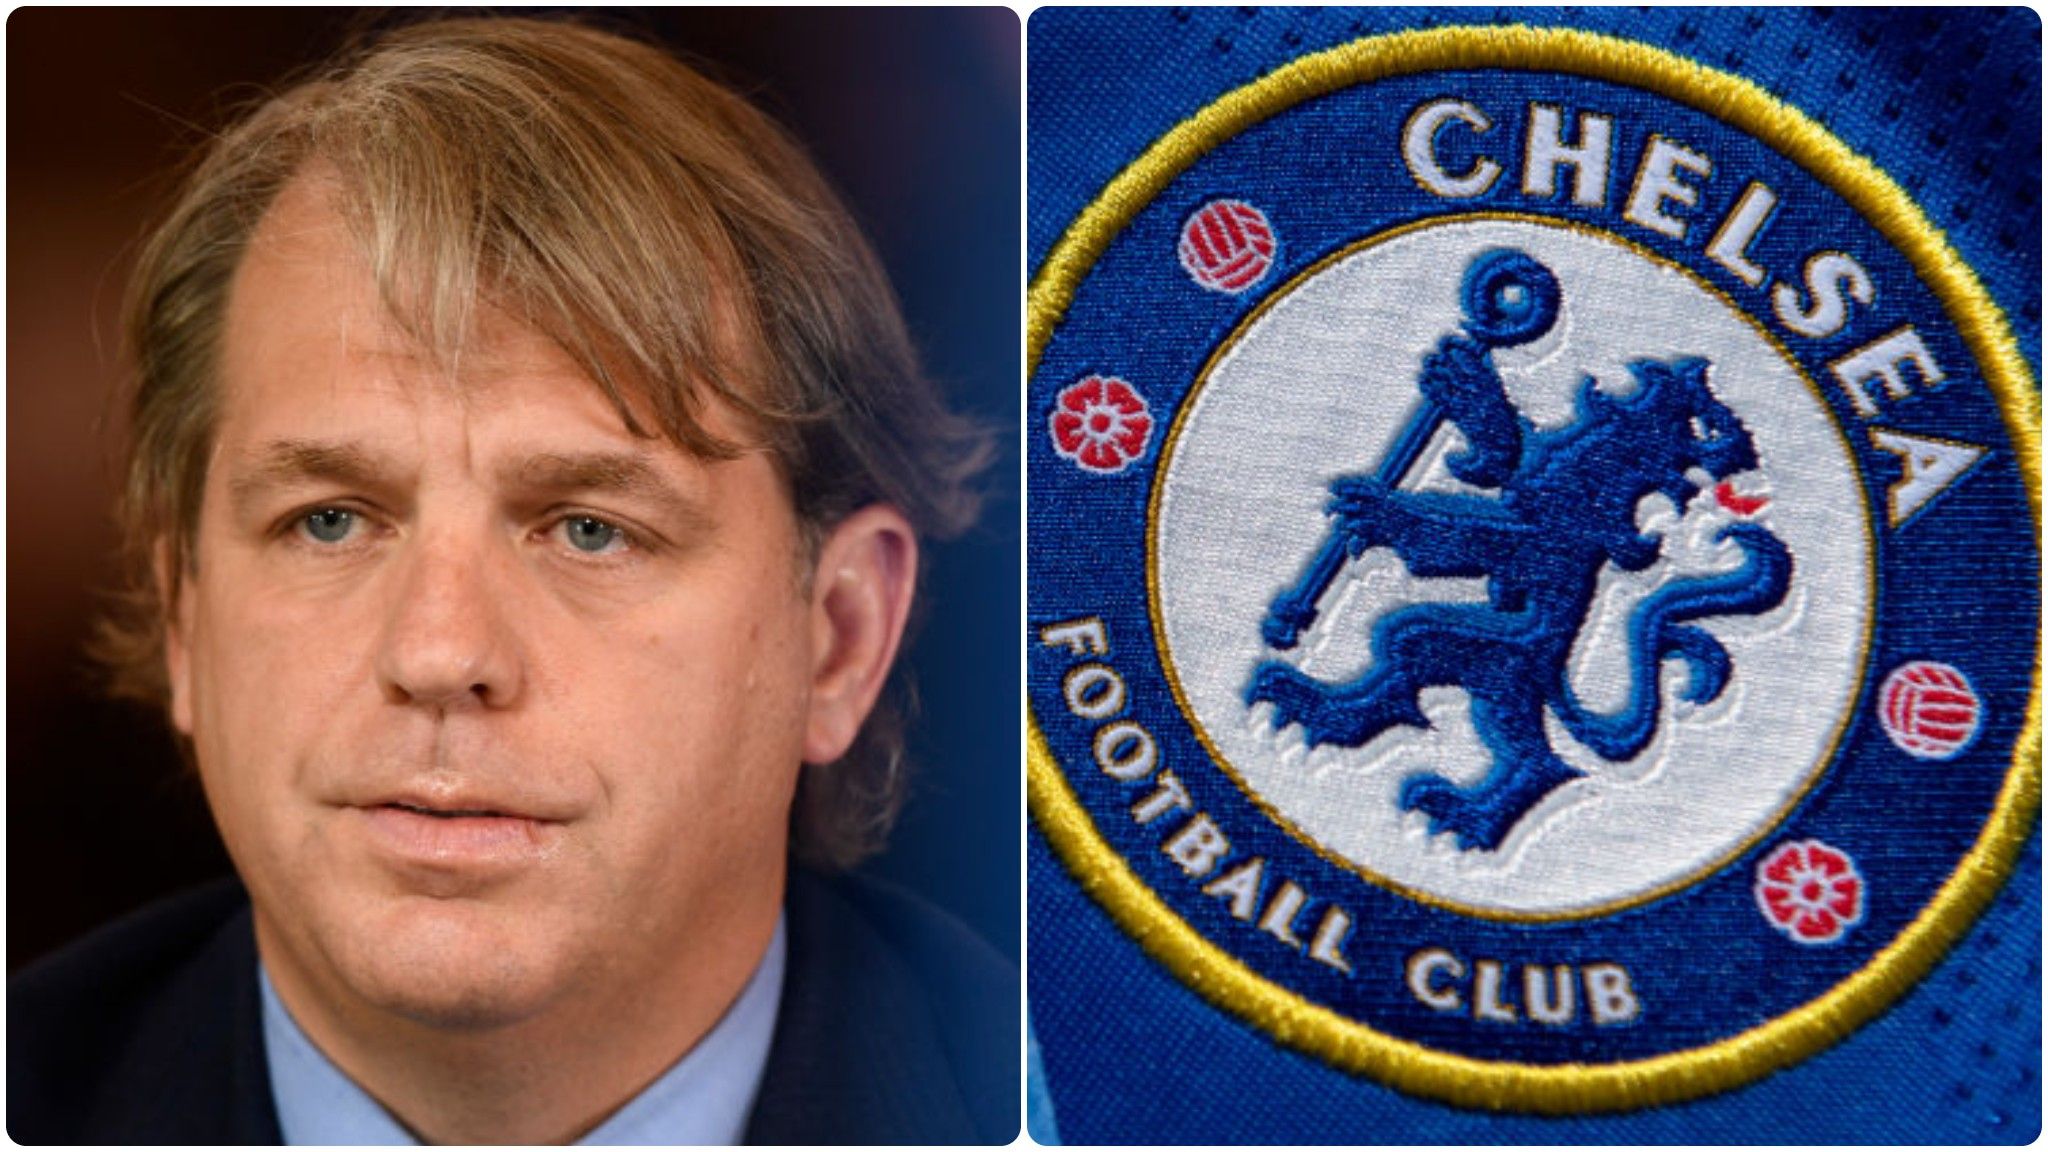 Todd Boehly and Chelsea crest